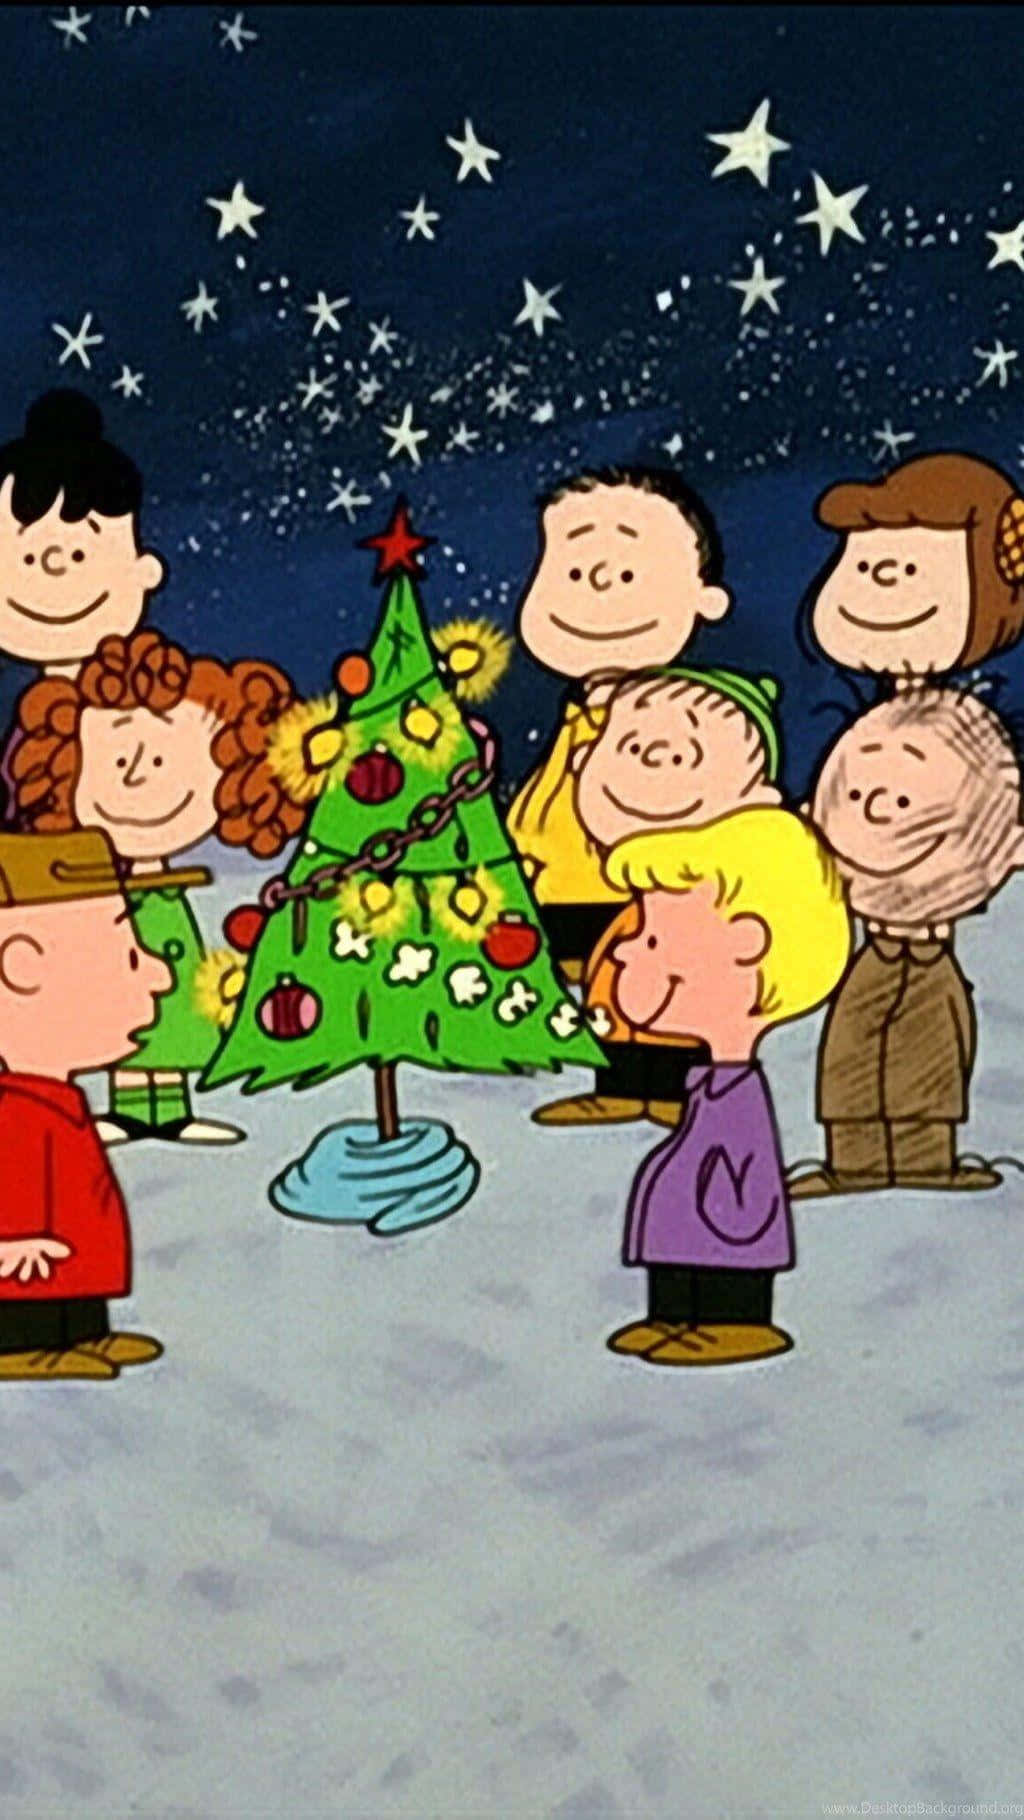 Celebrate The Joy Of The Season With Charlie Brown! Wallpaper